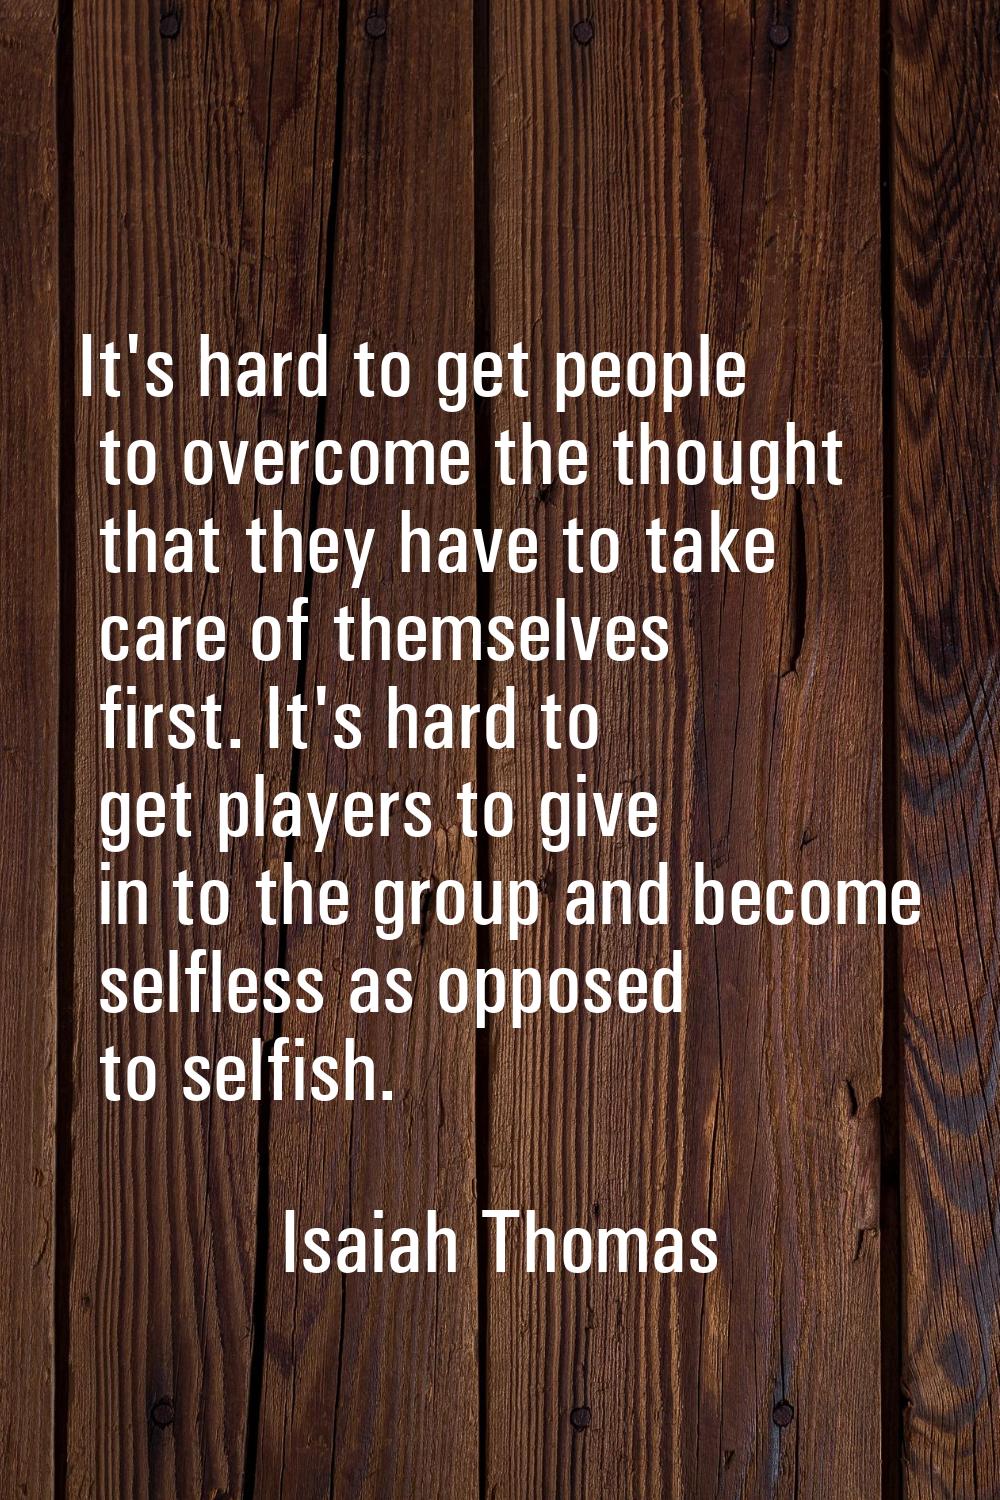 It's hard to get people to overcome the thought that they have to take care of themselves first. It